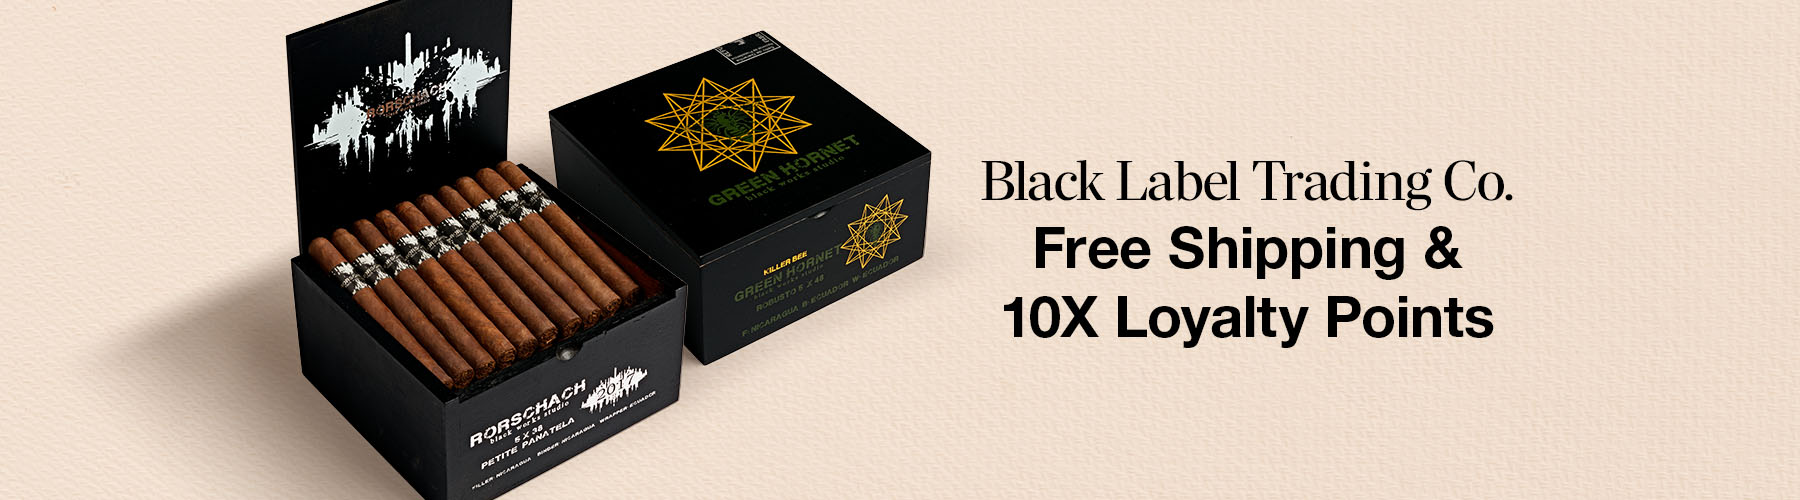 Black Label Trading Co. 
Free shipping & 10X Loyalty Points